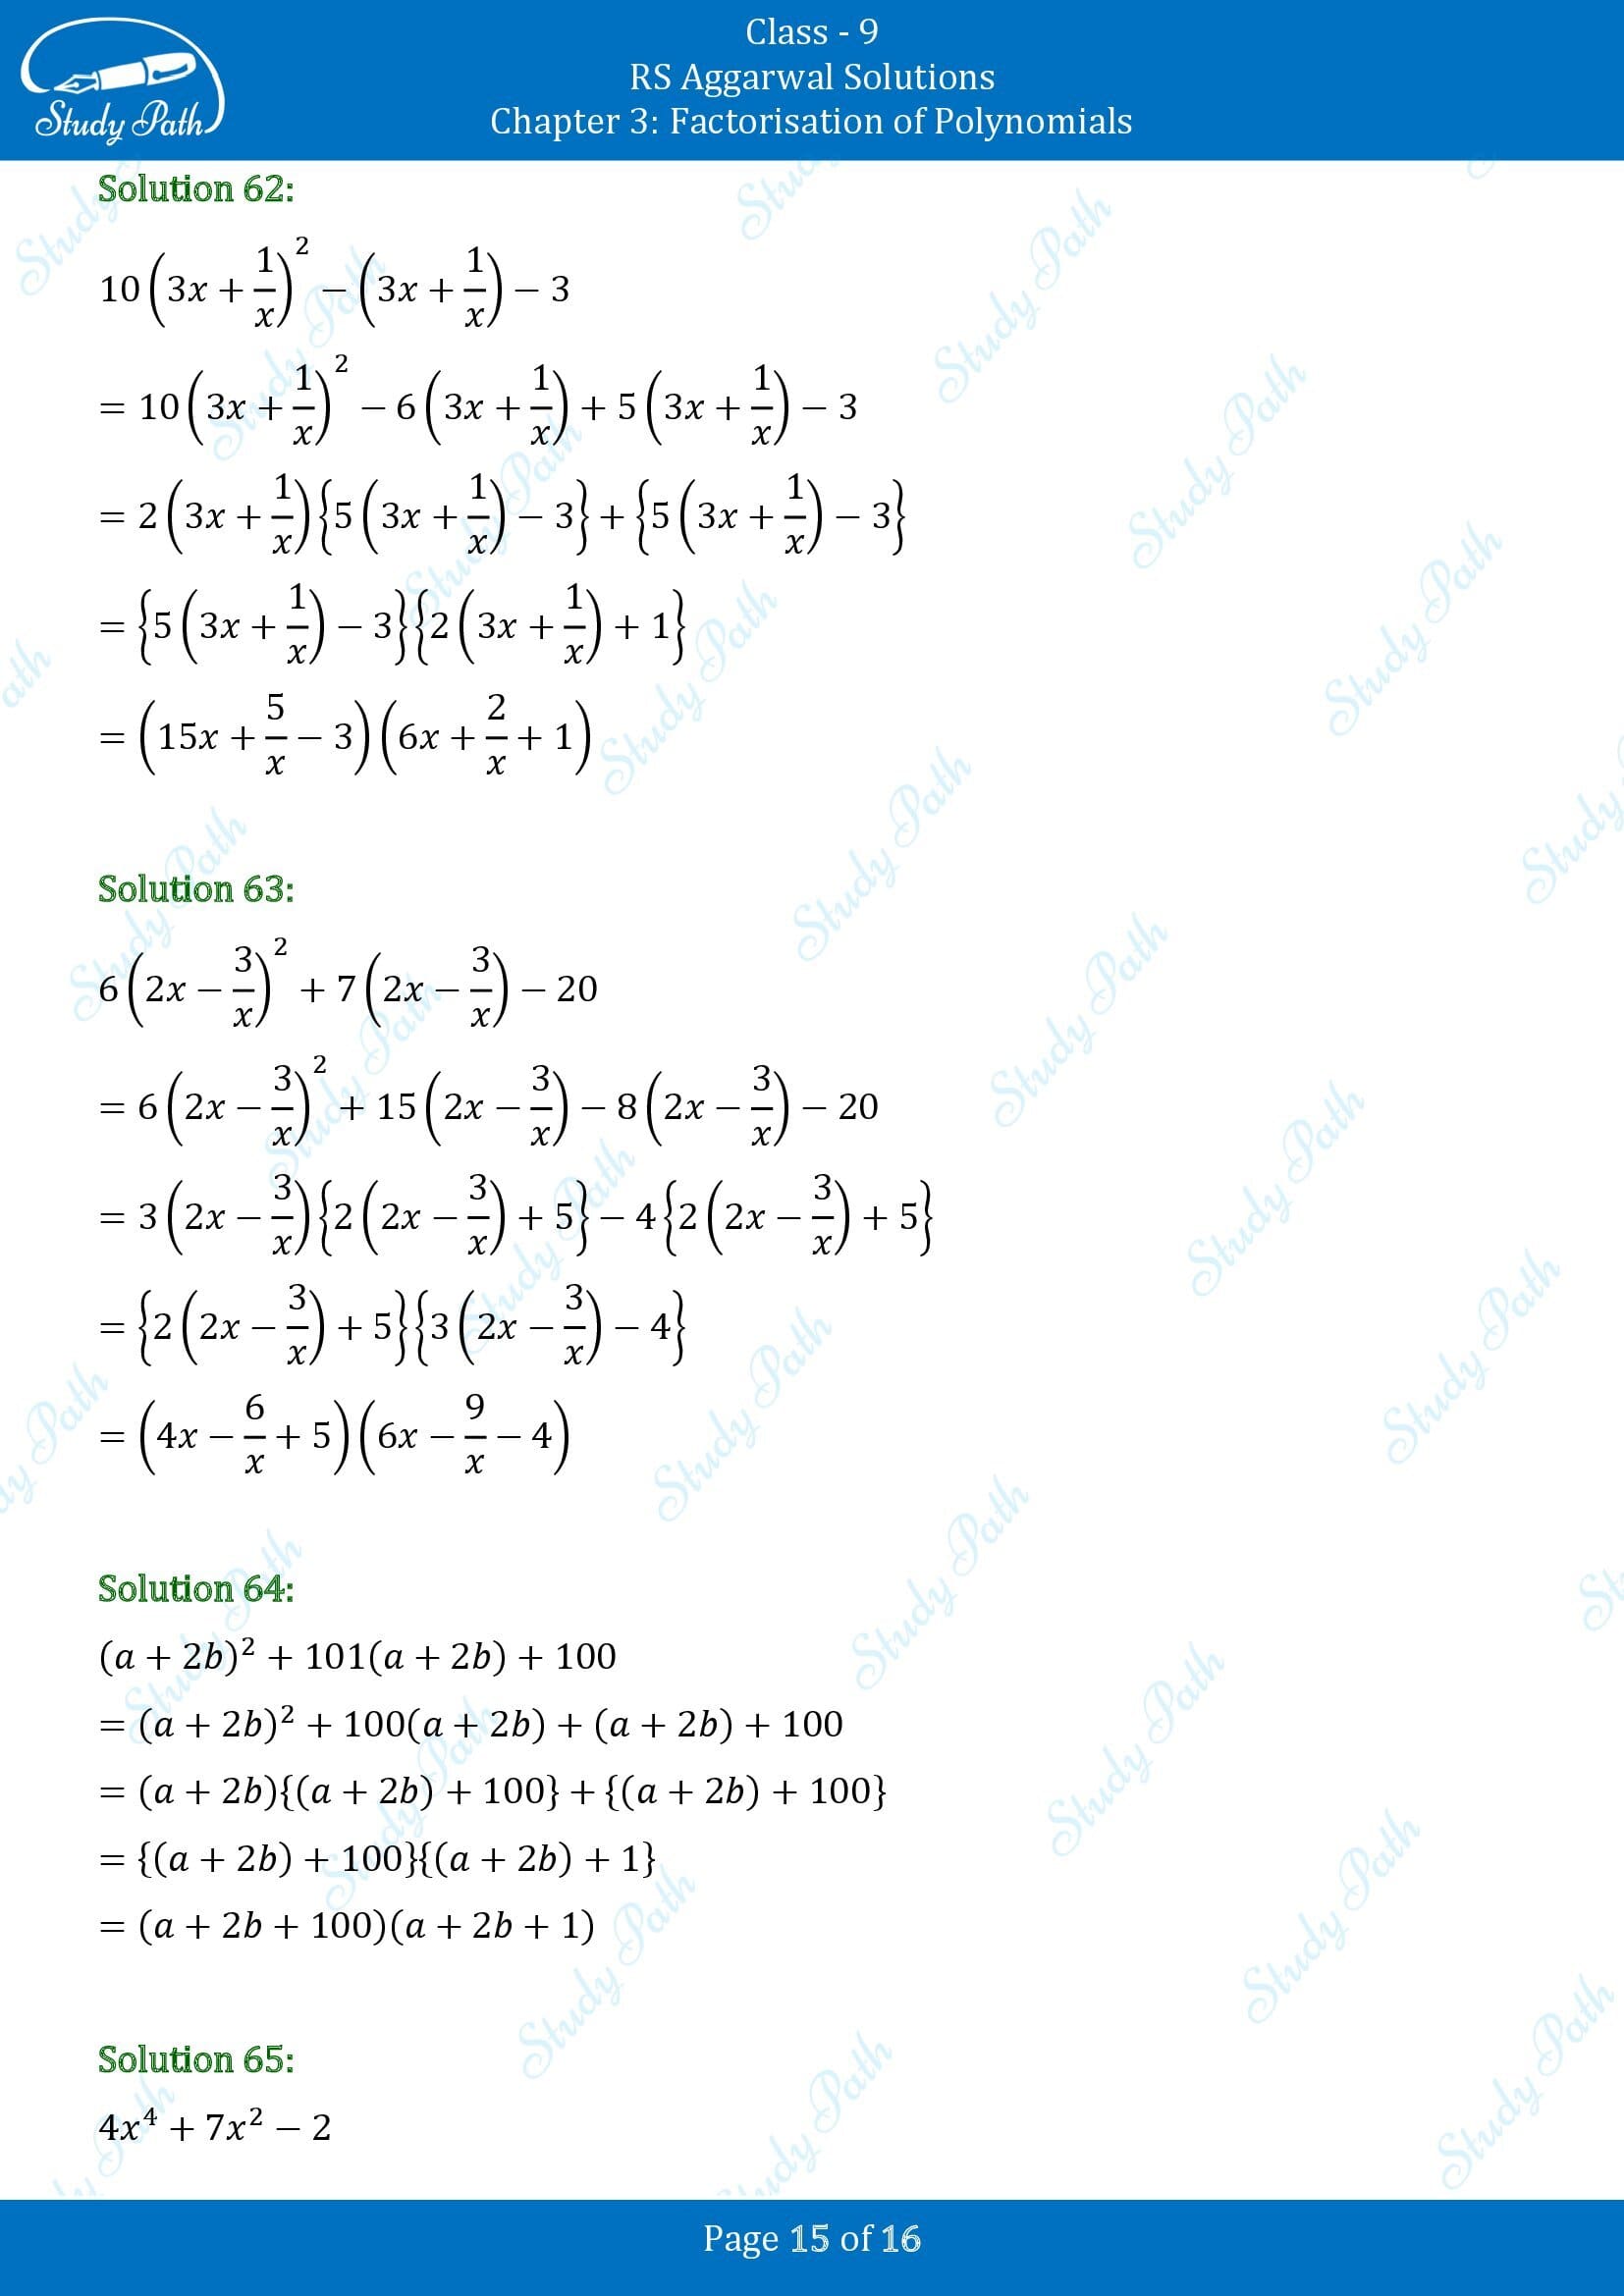 RS Aggarwal Solutions Class 9 Chapter 3 Factorisation of Polynomials Exercise 3C 00015